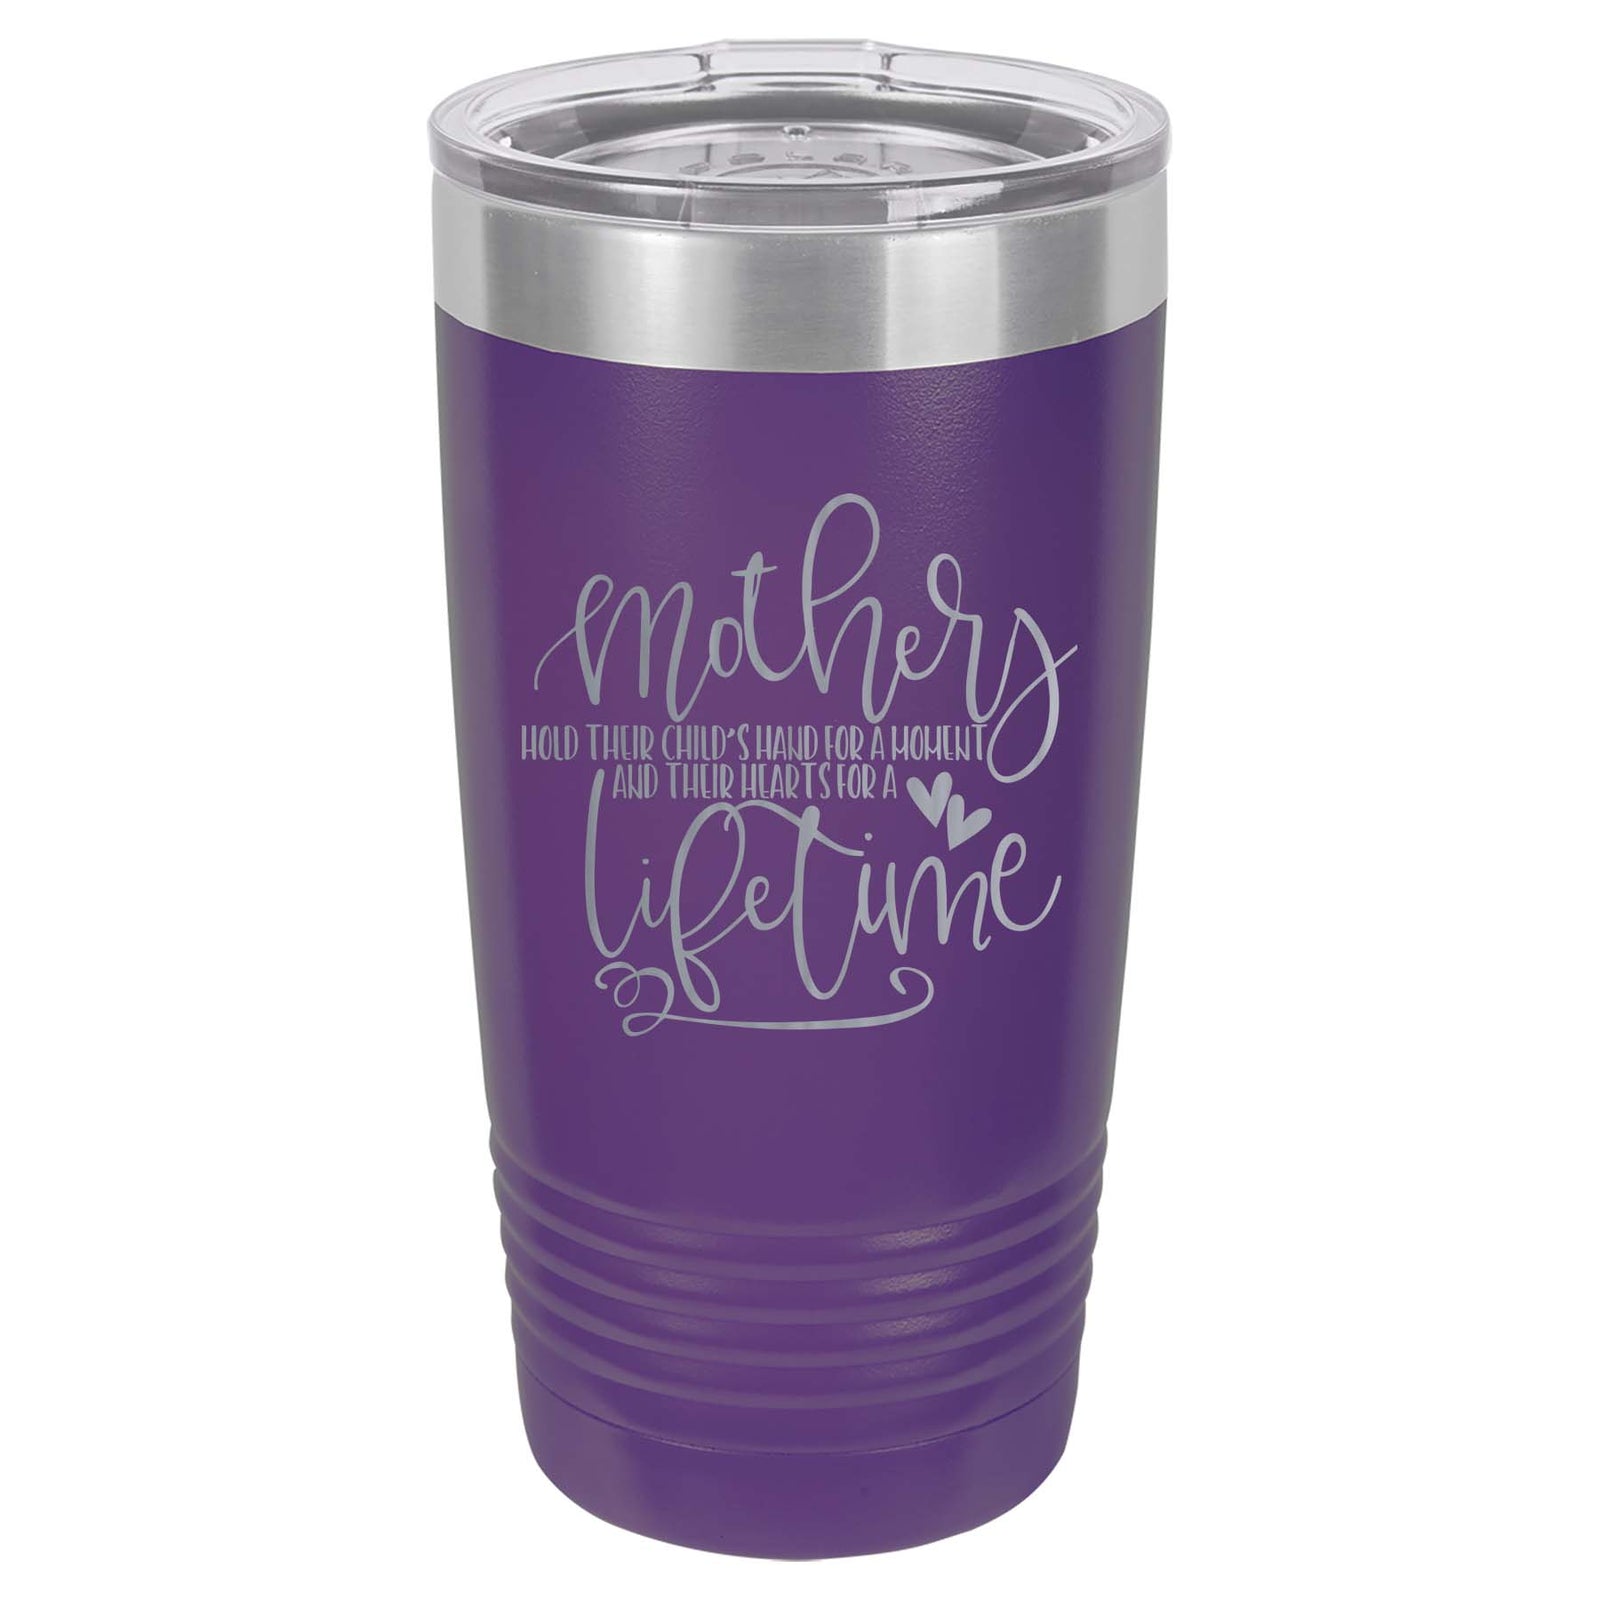 Not A Day Over 30oz Tumbler - Mother Tumbler